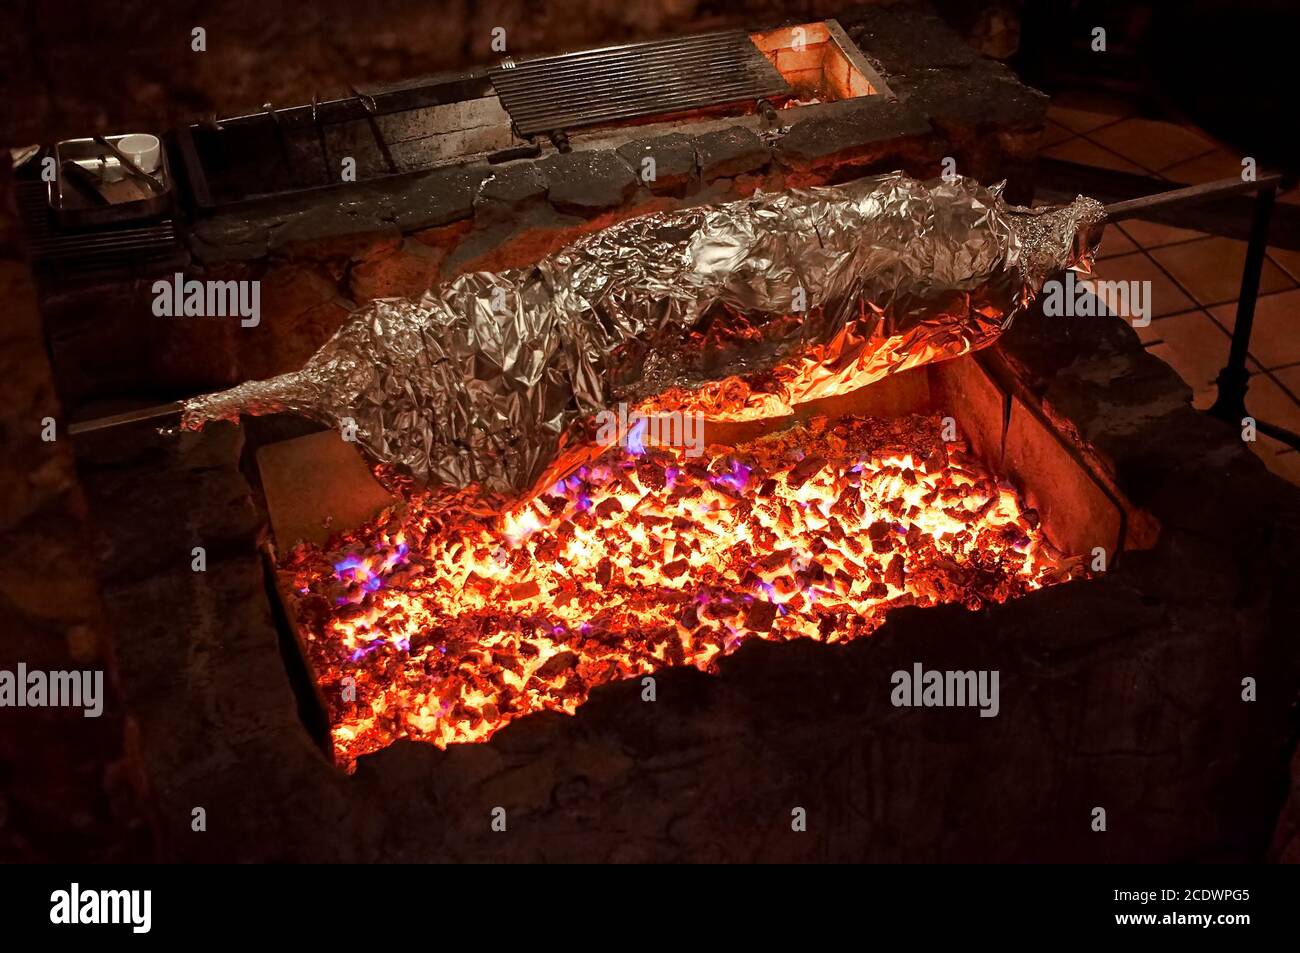 Grilled meat in foil on an open fire. Whole body animal wrapped with foil on a large grill, restaurant kitchen. Stock Photo